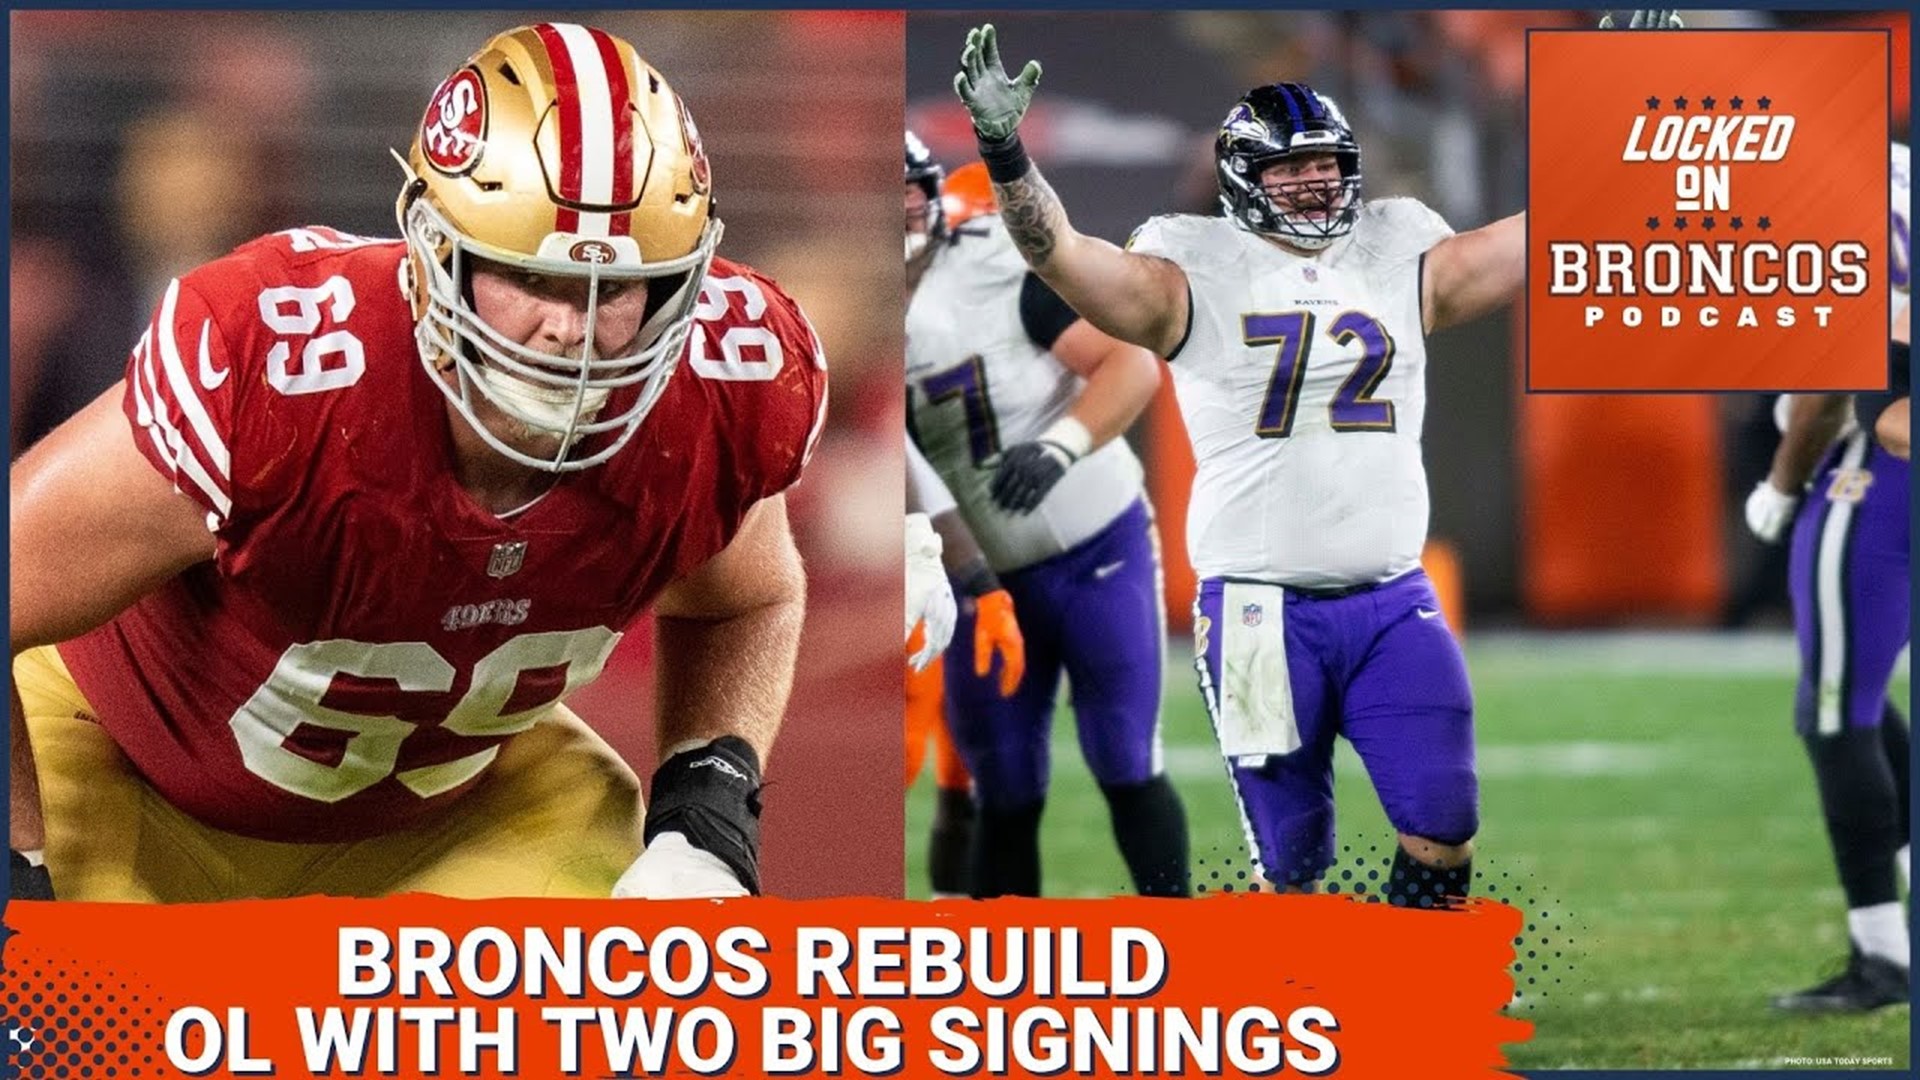 The Denver Broncos rebuilt their offensive line with Mike McGlinchey and Ben Powers.